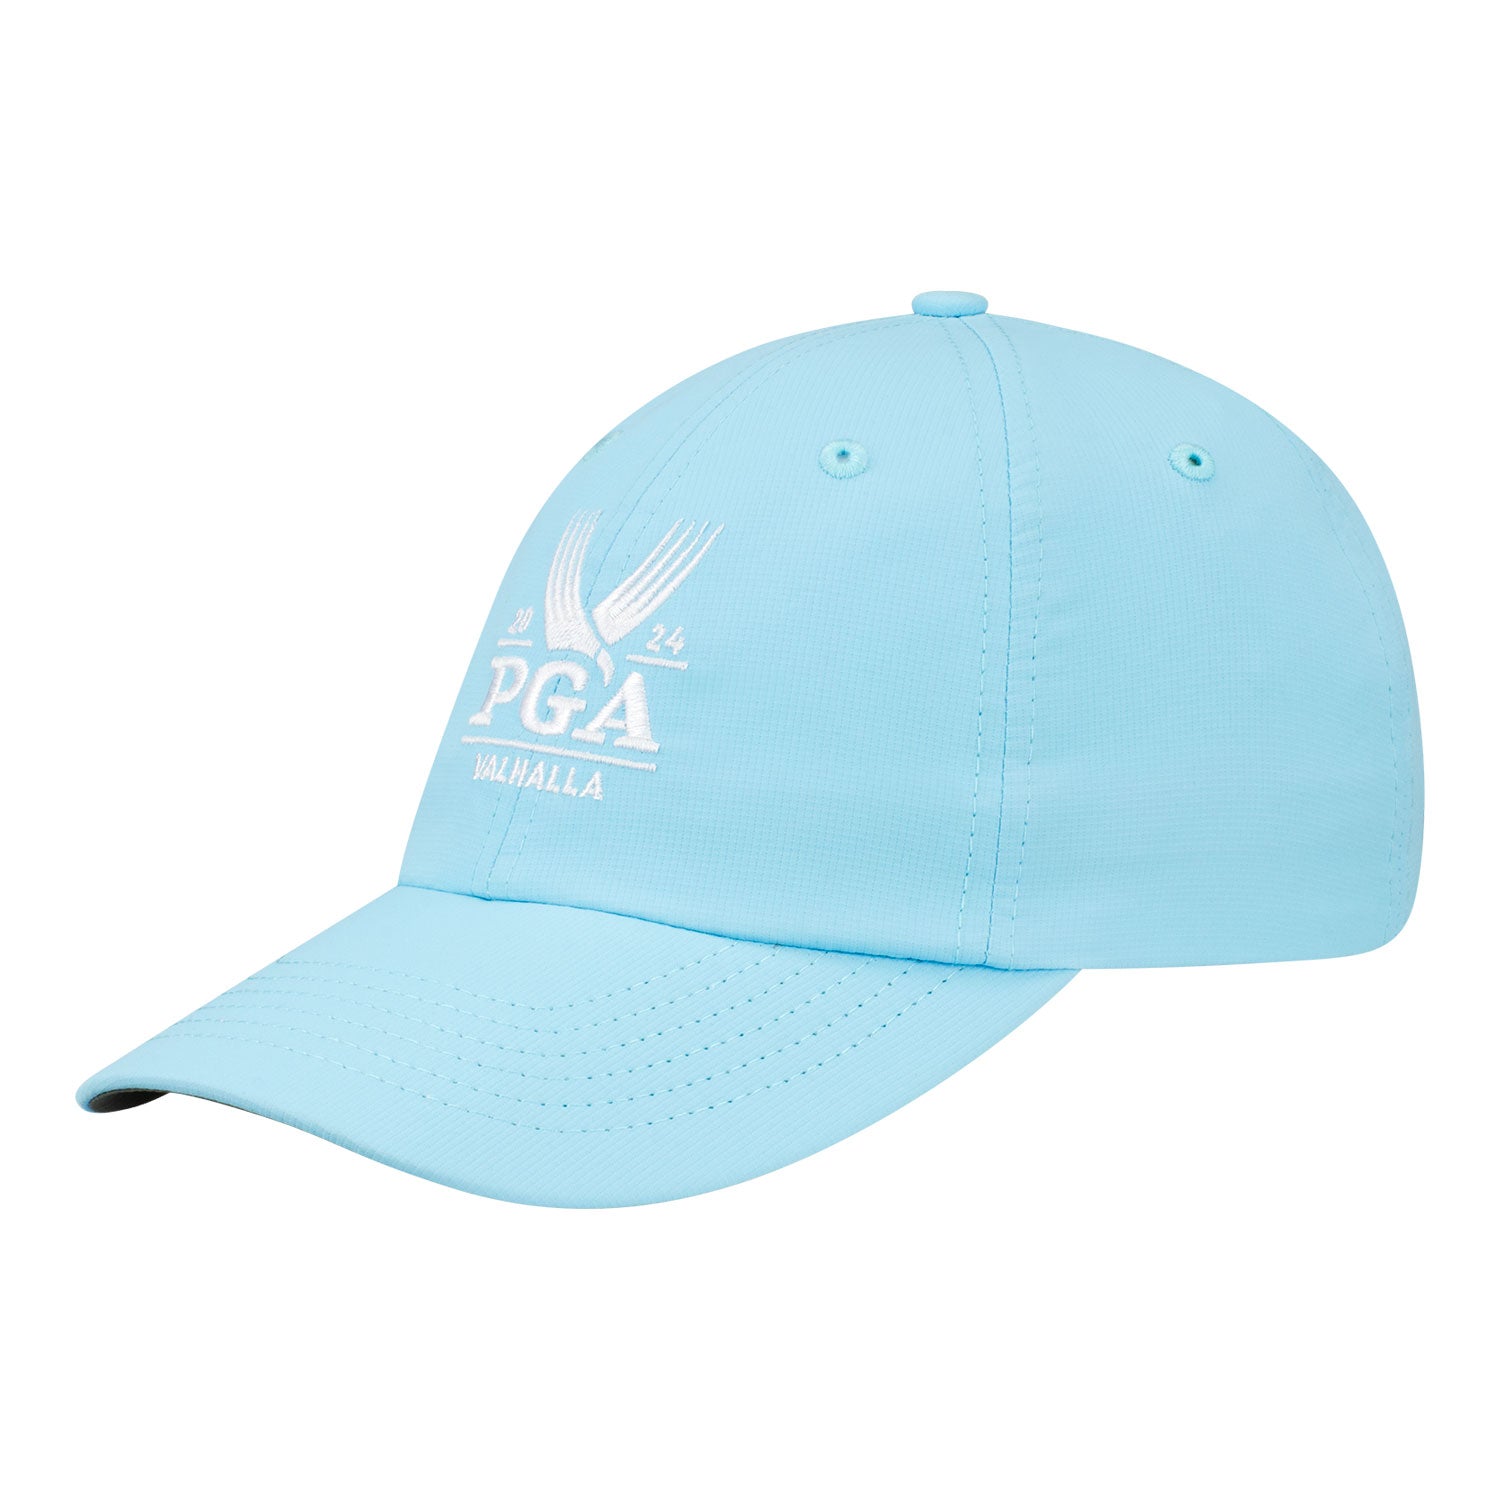 Imperial 2024 PGA Championship Performance Hat in Light Blue - Angled Front Left View